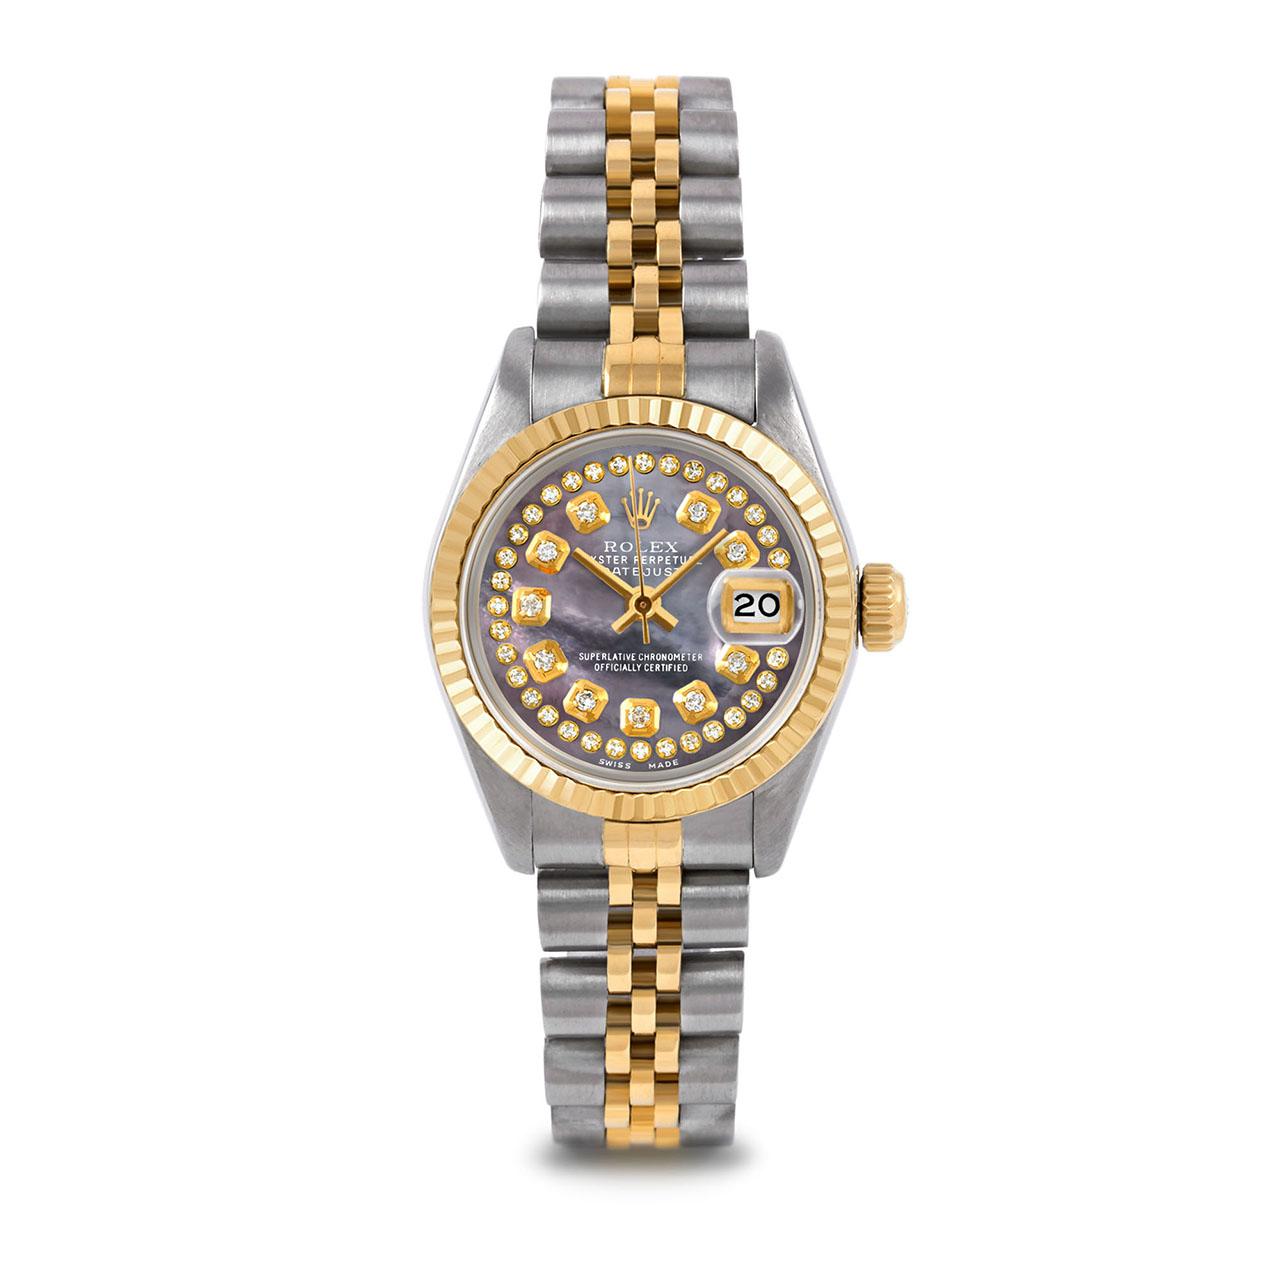 Pre-Owned Rolex 6917 Ladies 26mm Two Tone Datejust Watch, Custom Black Mother of Pearl String Diamond Dial & Fluted Bezel on Rolex 14K Yellow Gold And Stainless Steel Jubilee Band.   

SKU 6917-TT-BMOP-STRD-FLT-JBL


Brand/Model:        Rolex